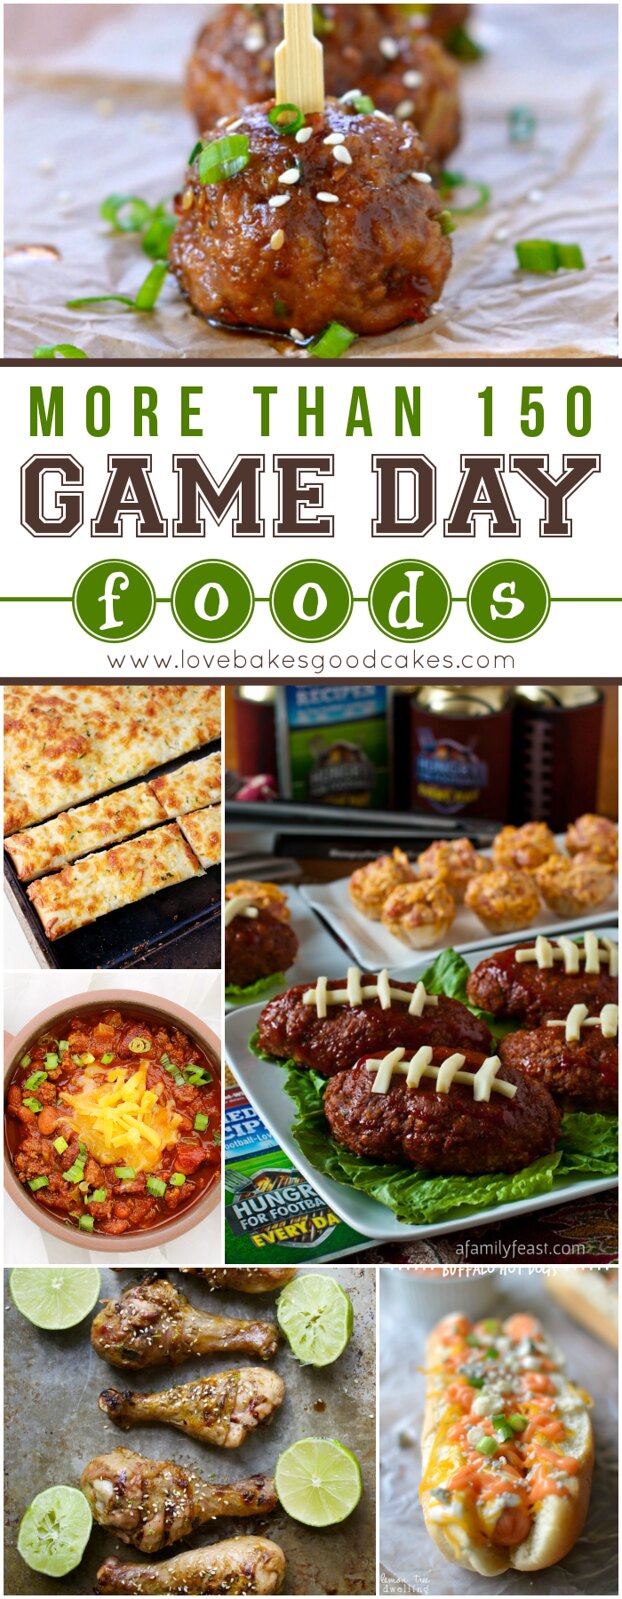 More than 150 Game Day Foods collage.